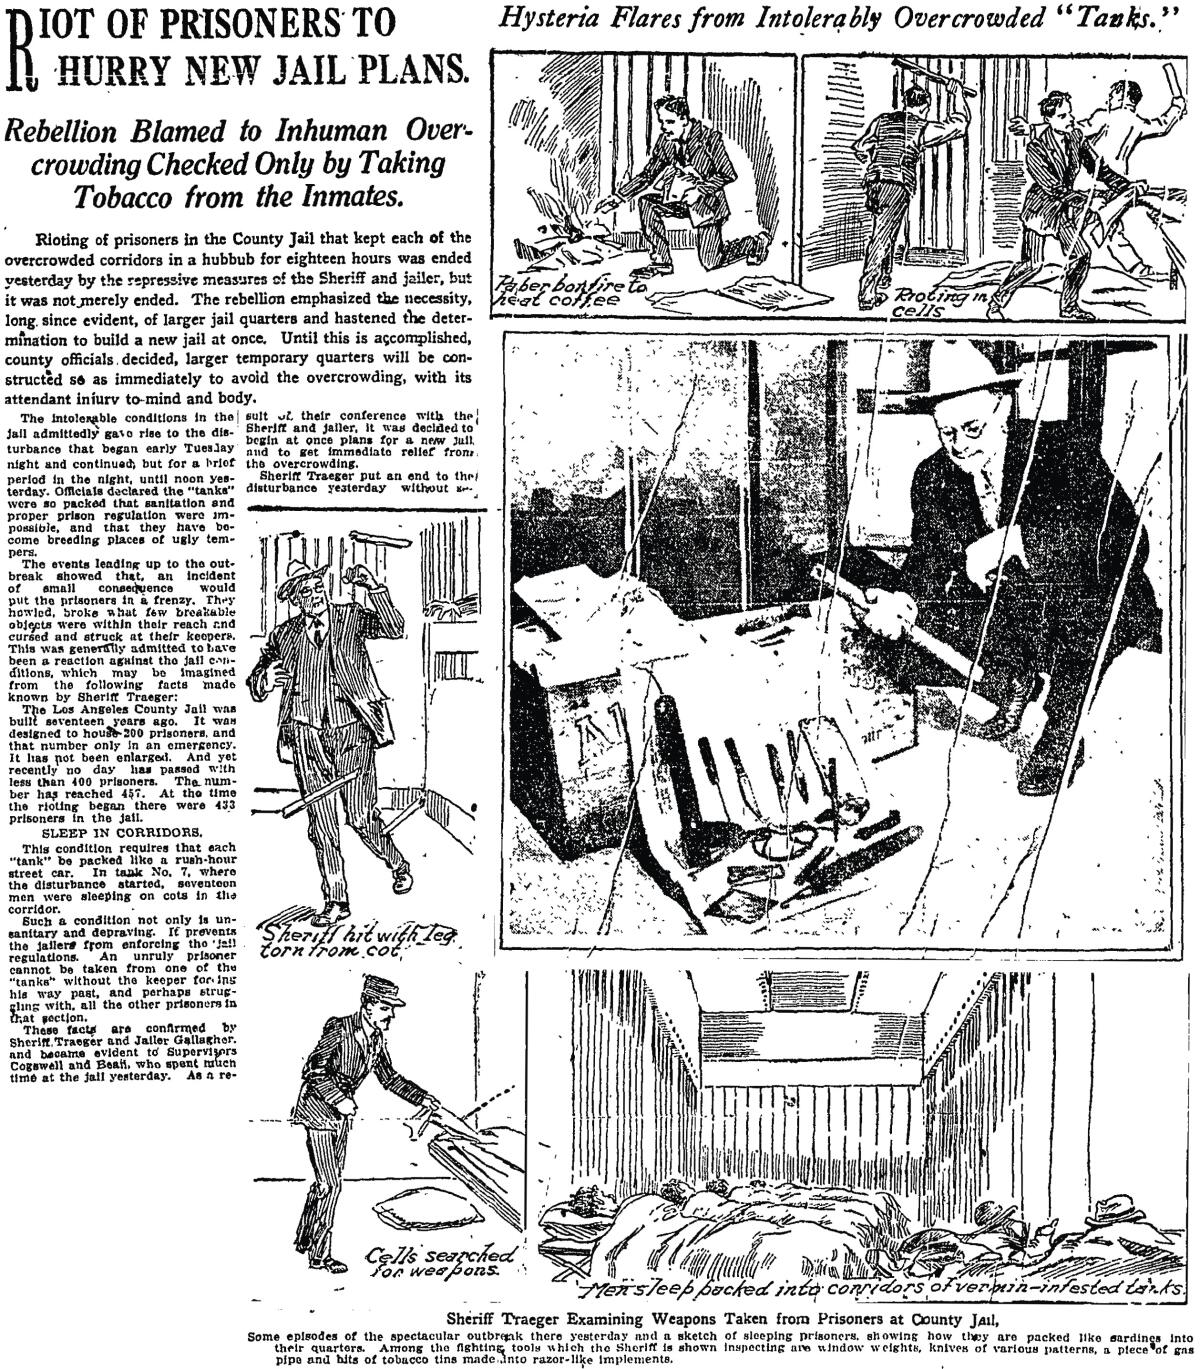 A page from a newspaper with an article about a prison riot, with a photo and drawings.